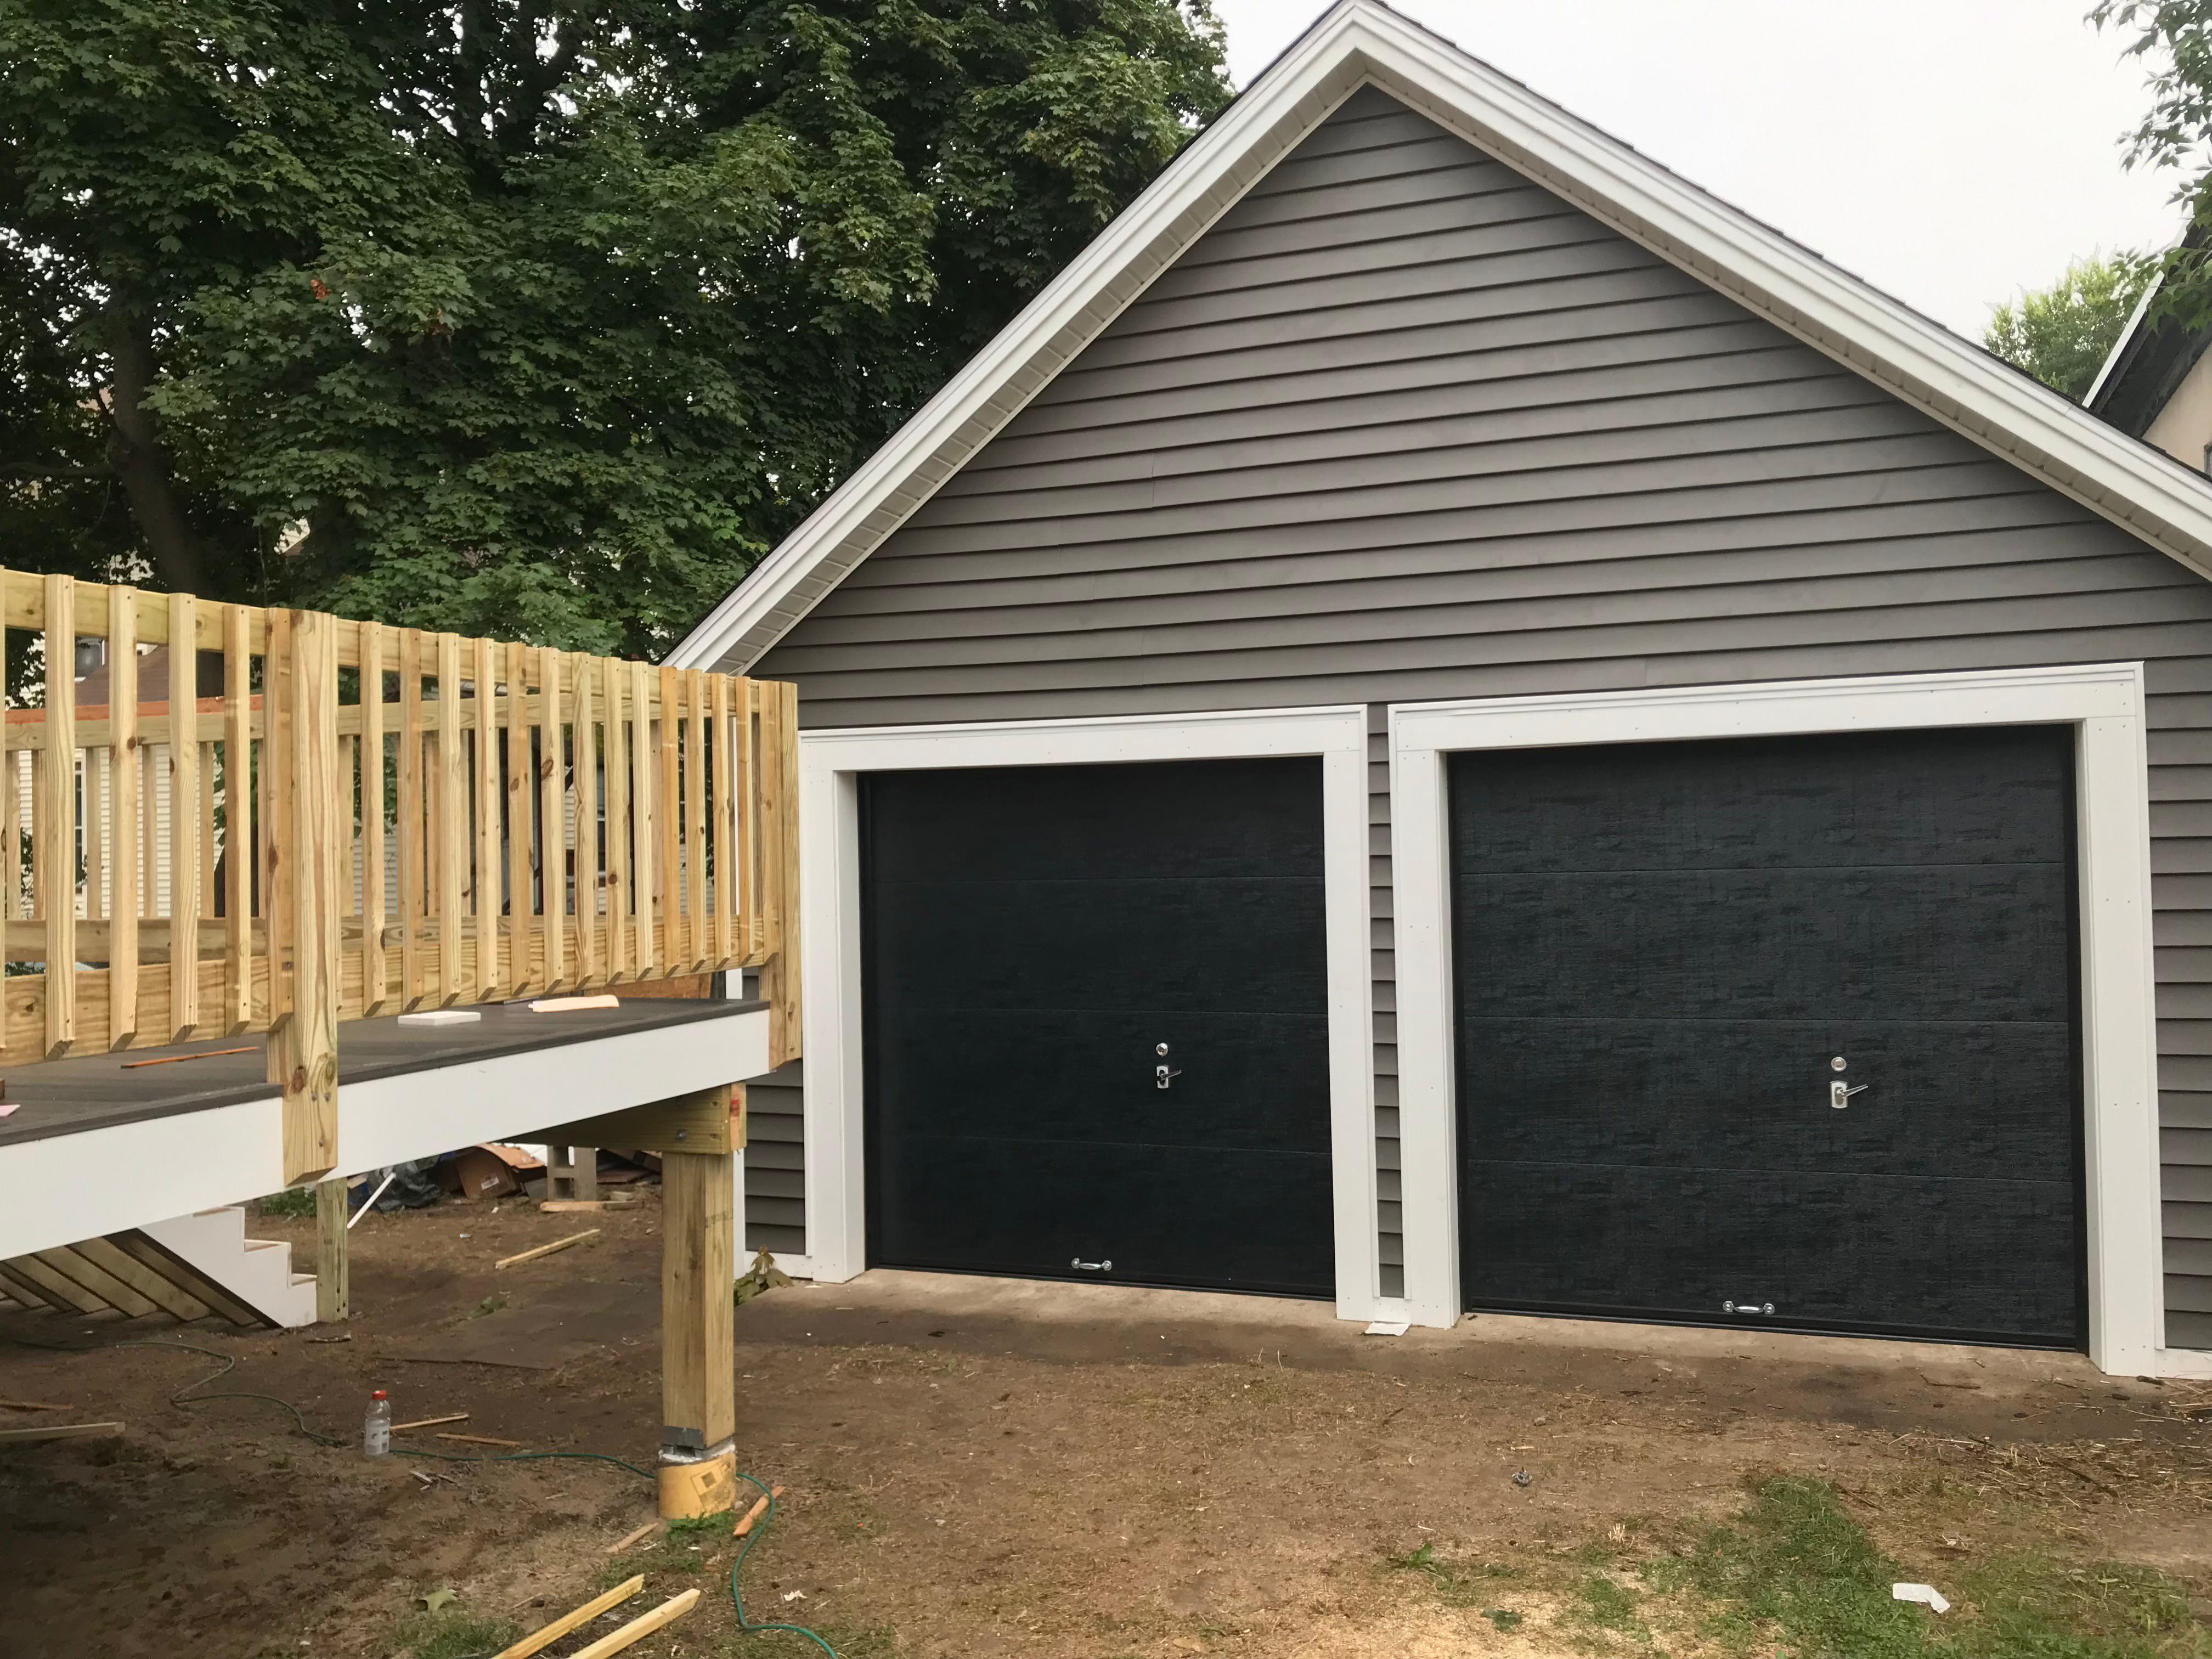 On this project in Concord, NH, we installed new siding, framing, and garage doors. We also built a new rear deck.